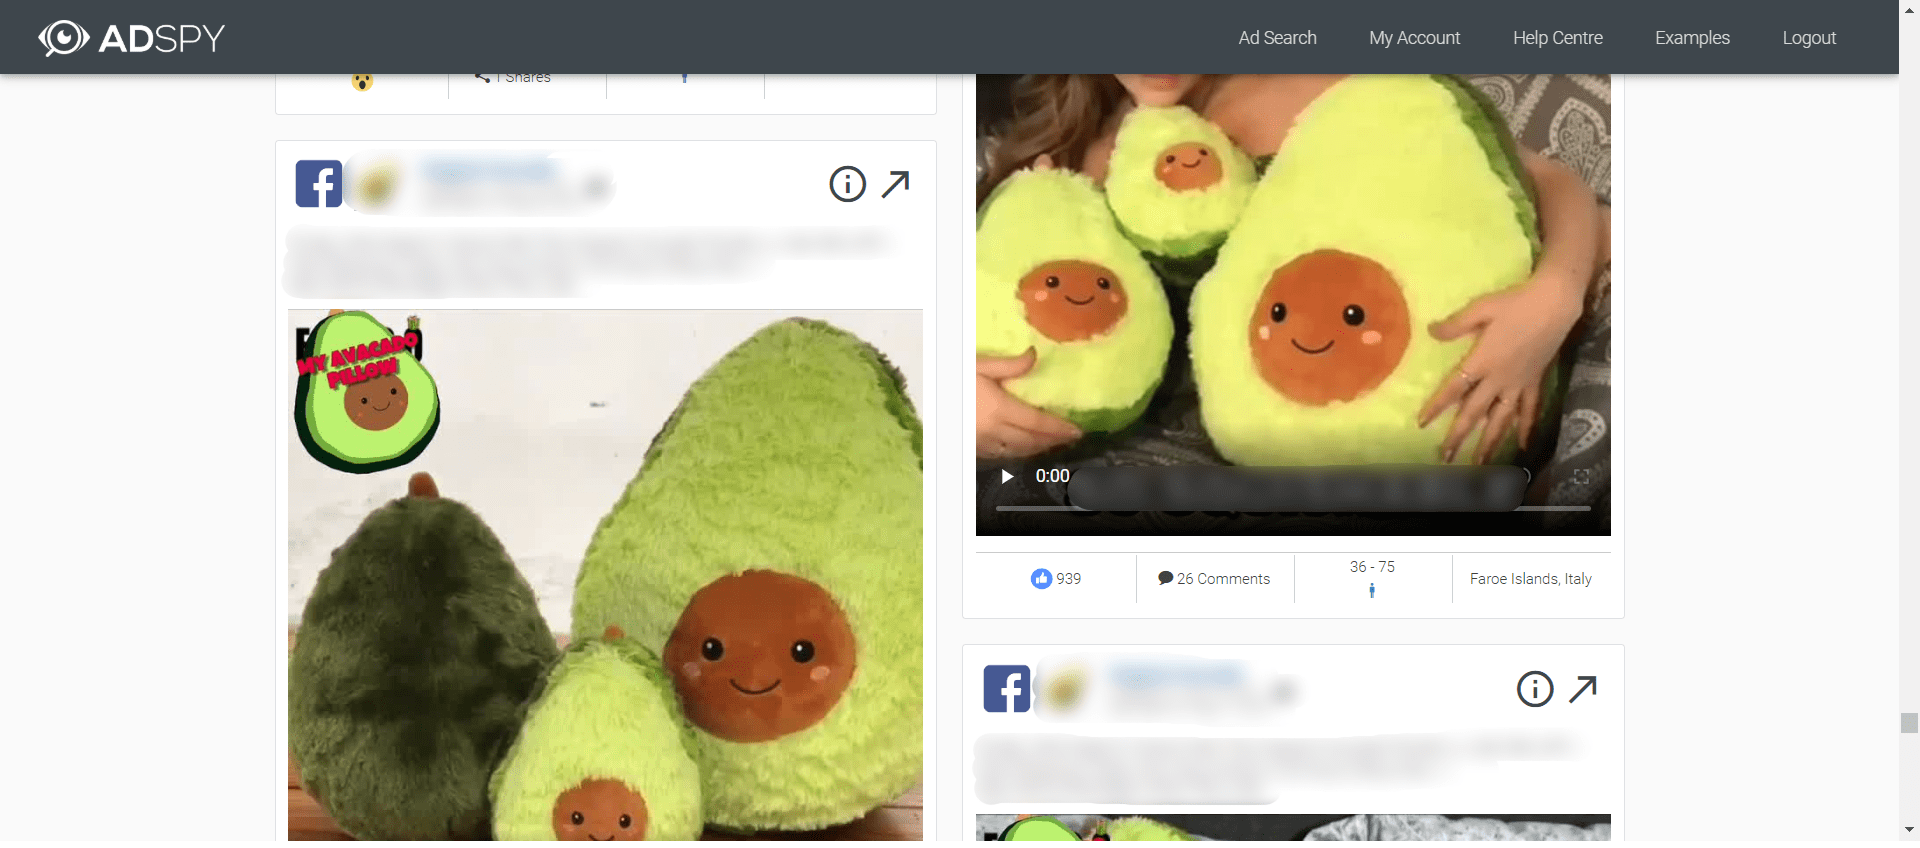 Ads promoting an avocado plush toy found on AdSpy